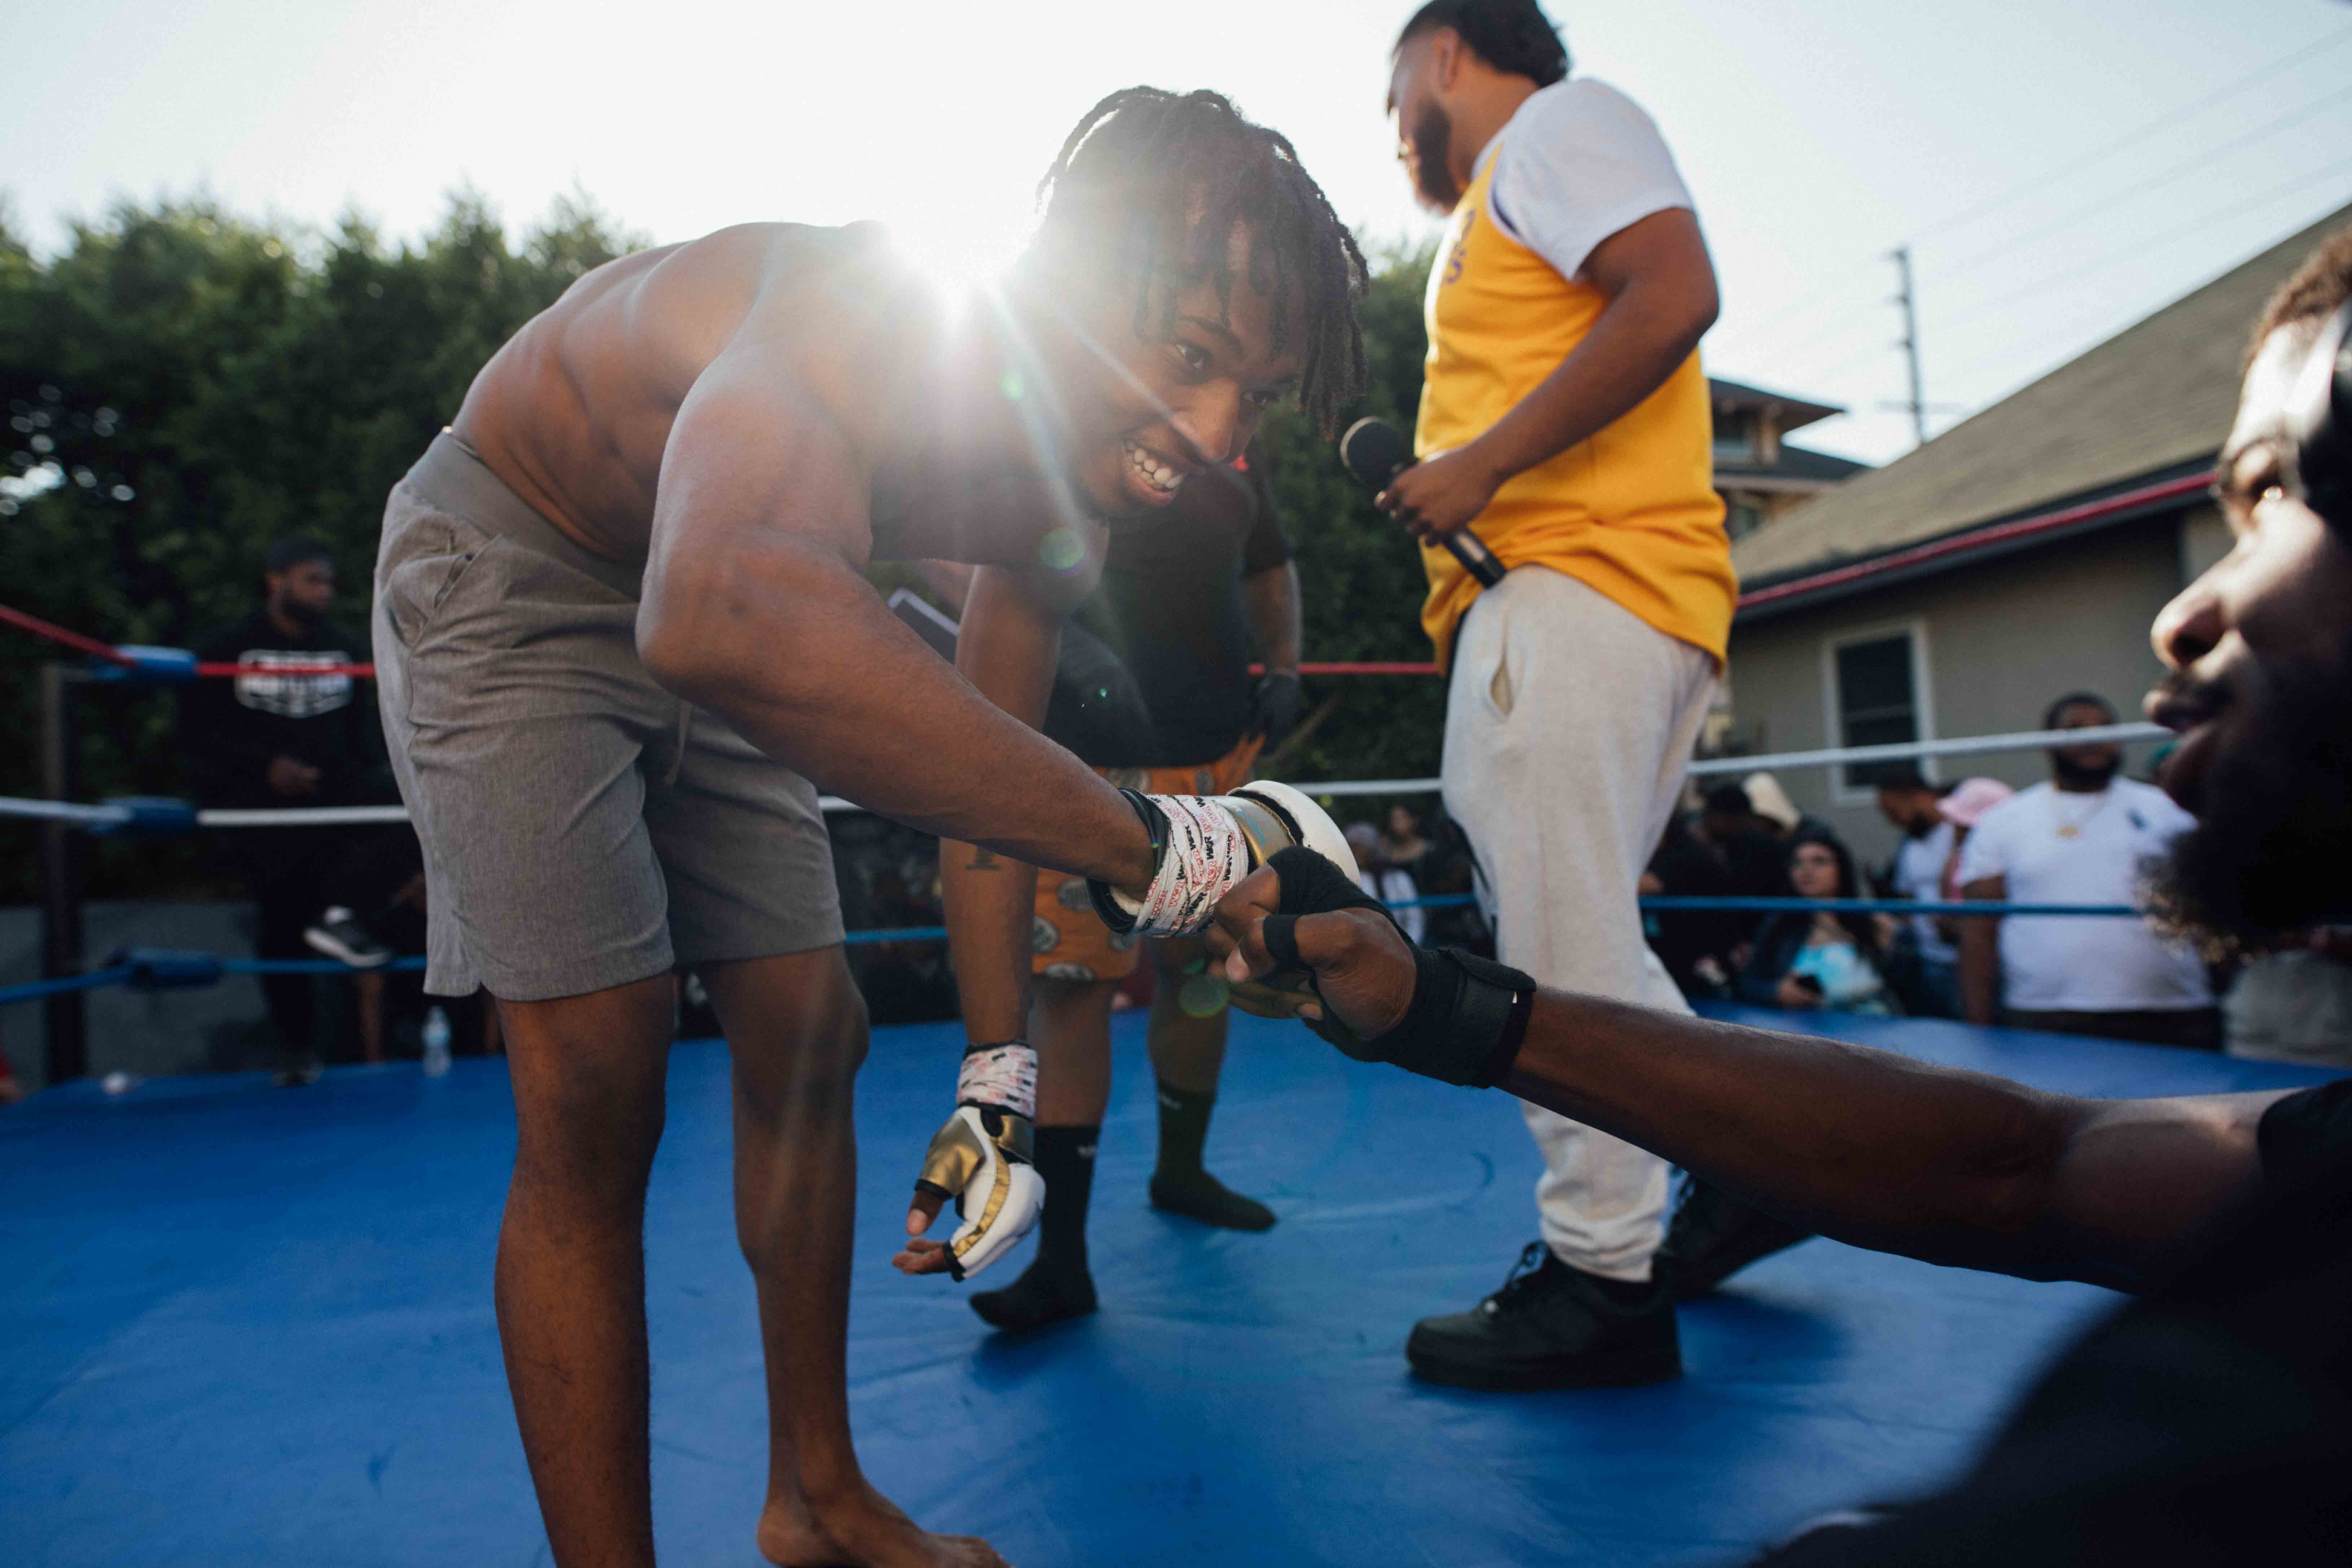 Fighters practice good sportsmanship while fighting.